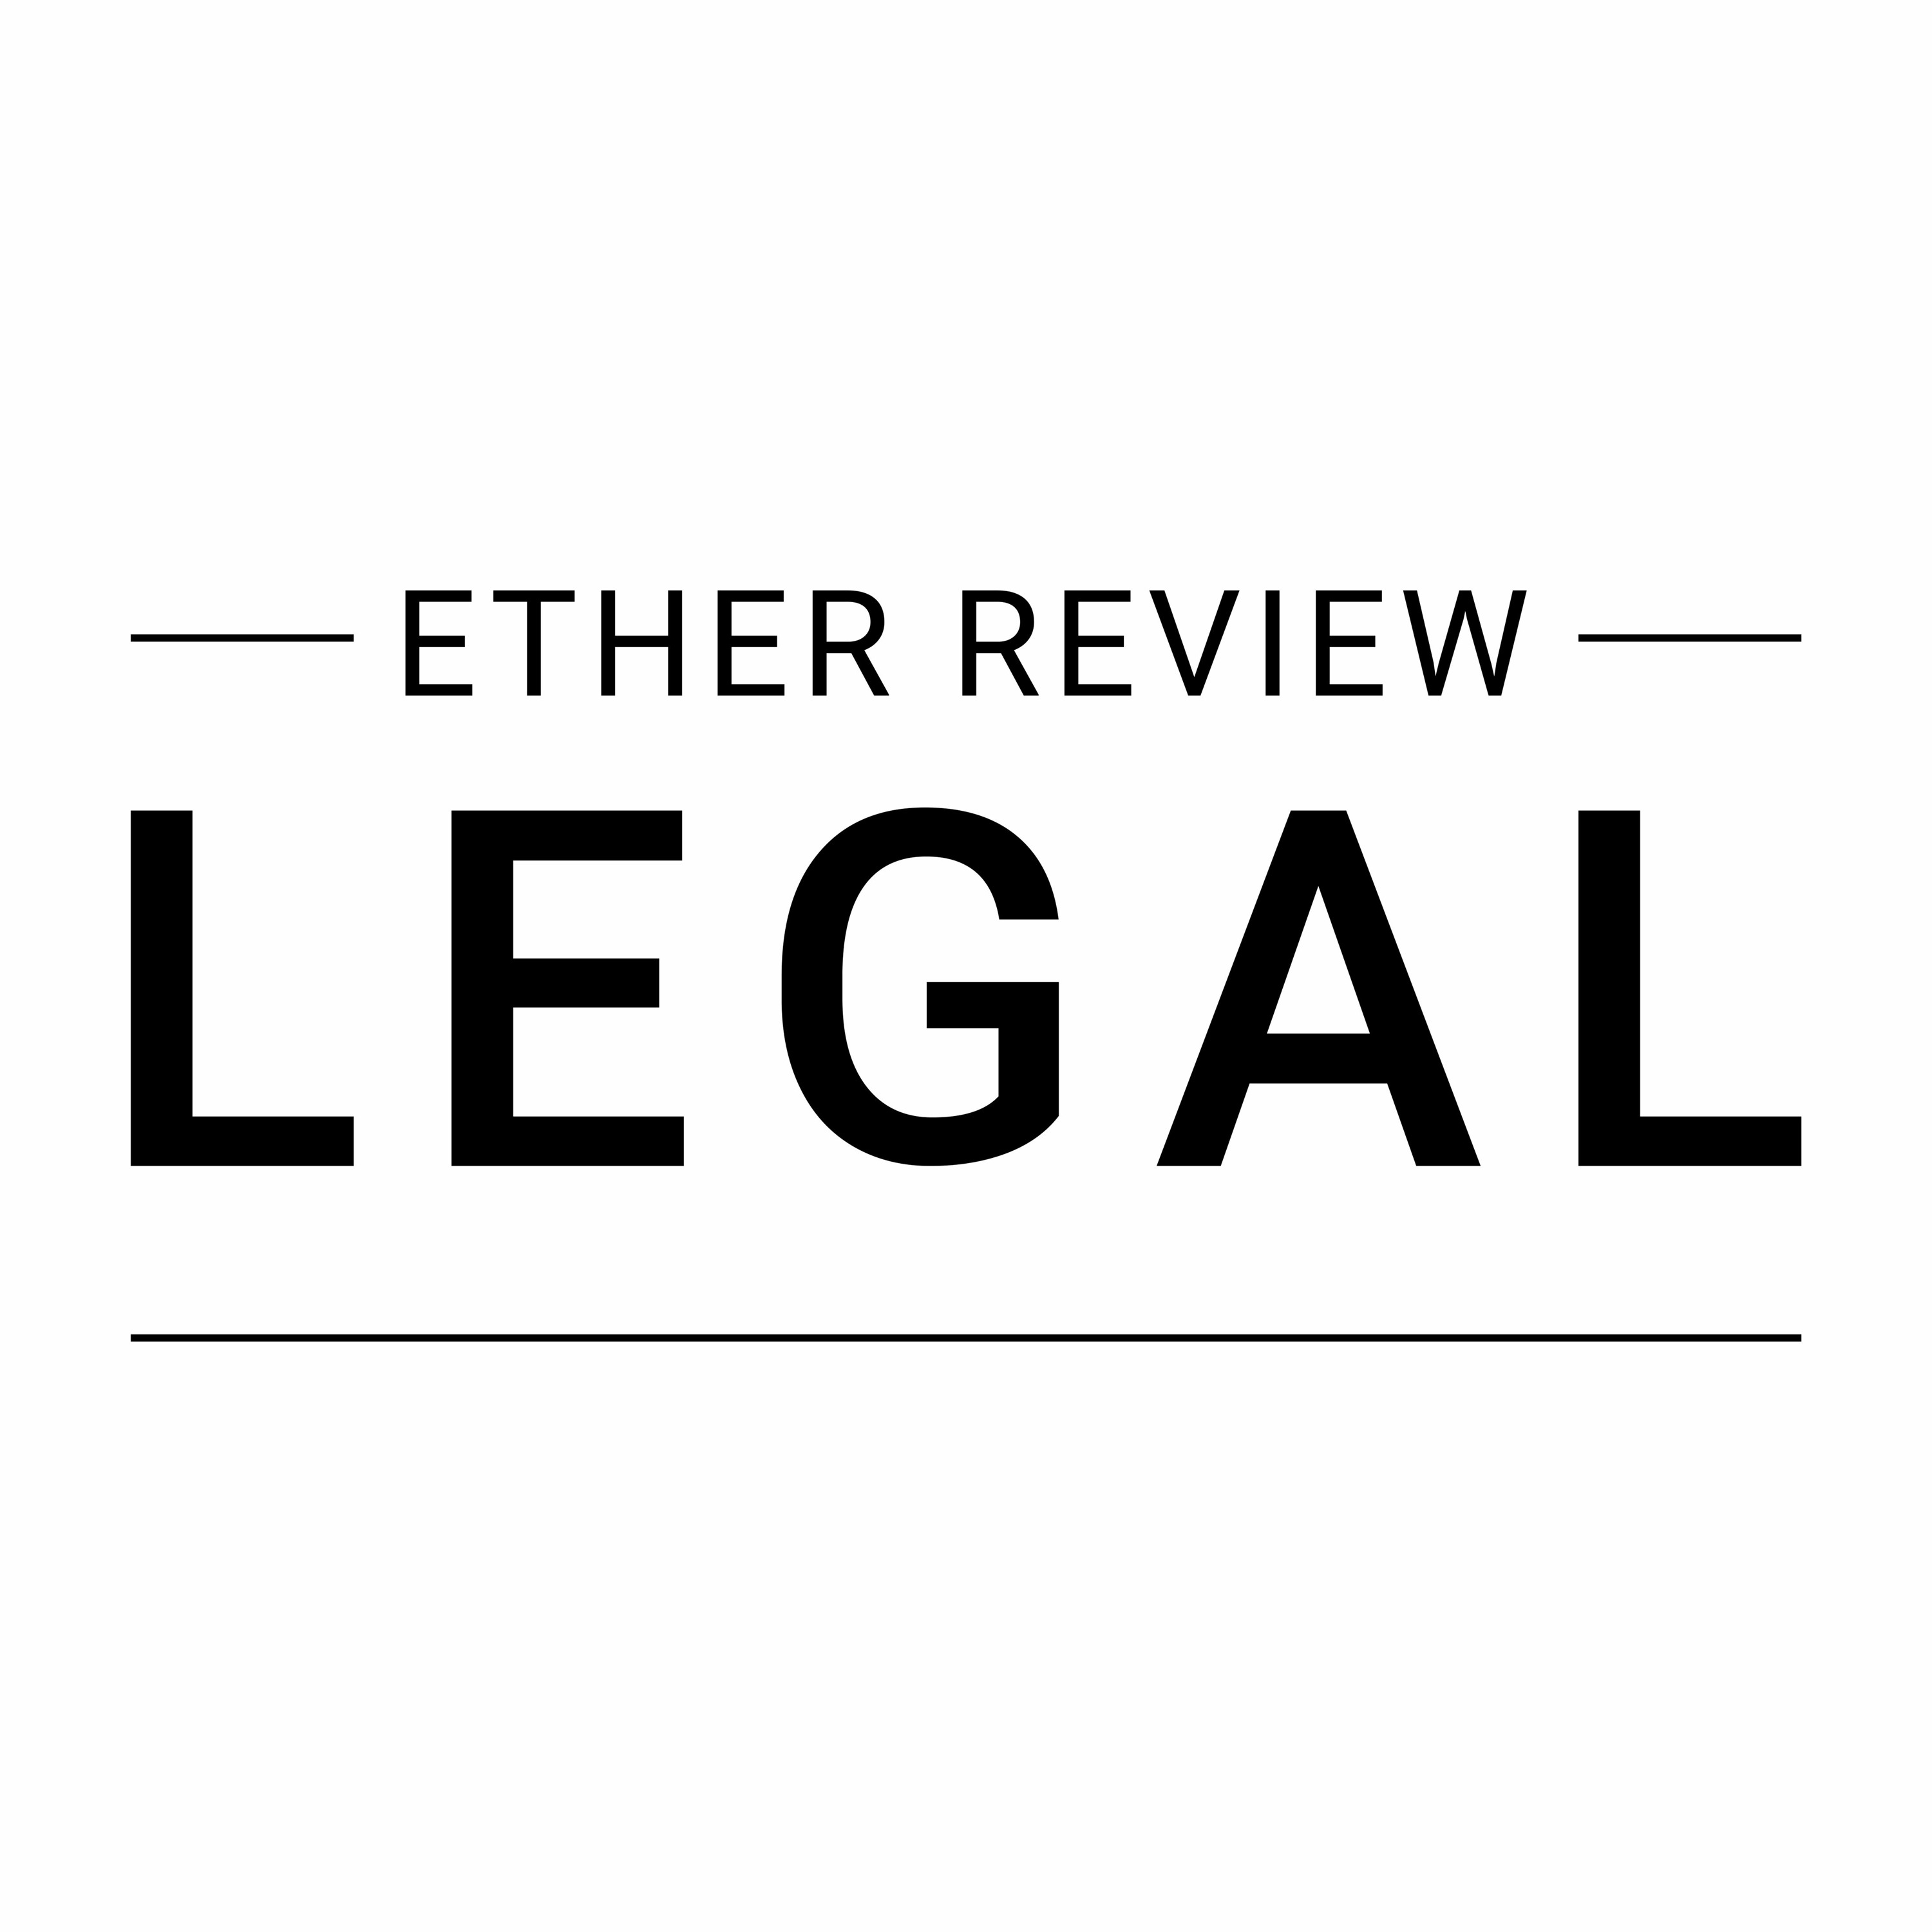 Ether Review Legal Discussion #2 The Legality of Raising Money Using Tokens